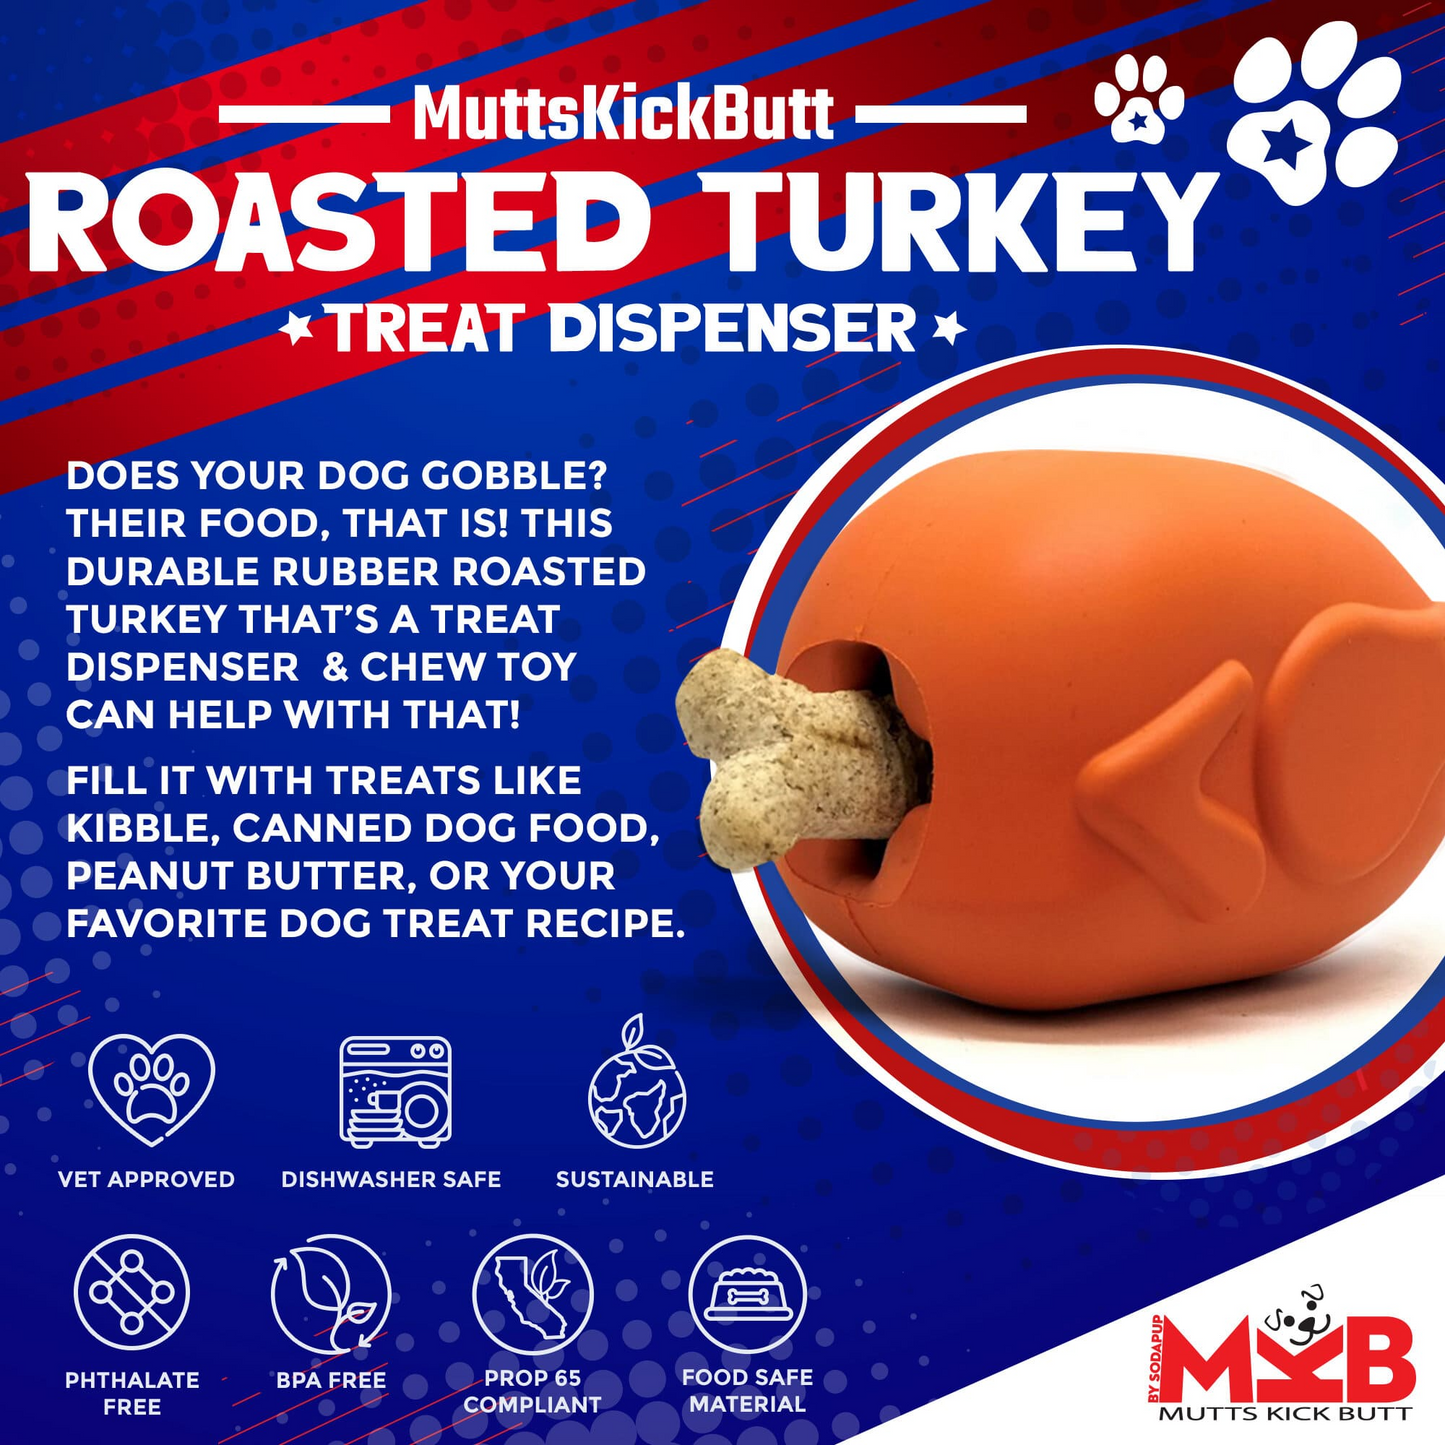 Roasted Turkey Durable Rubber chew Toy & Treat Dispenser